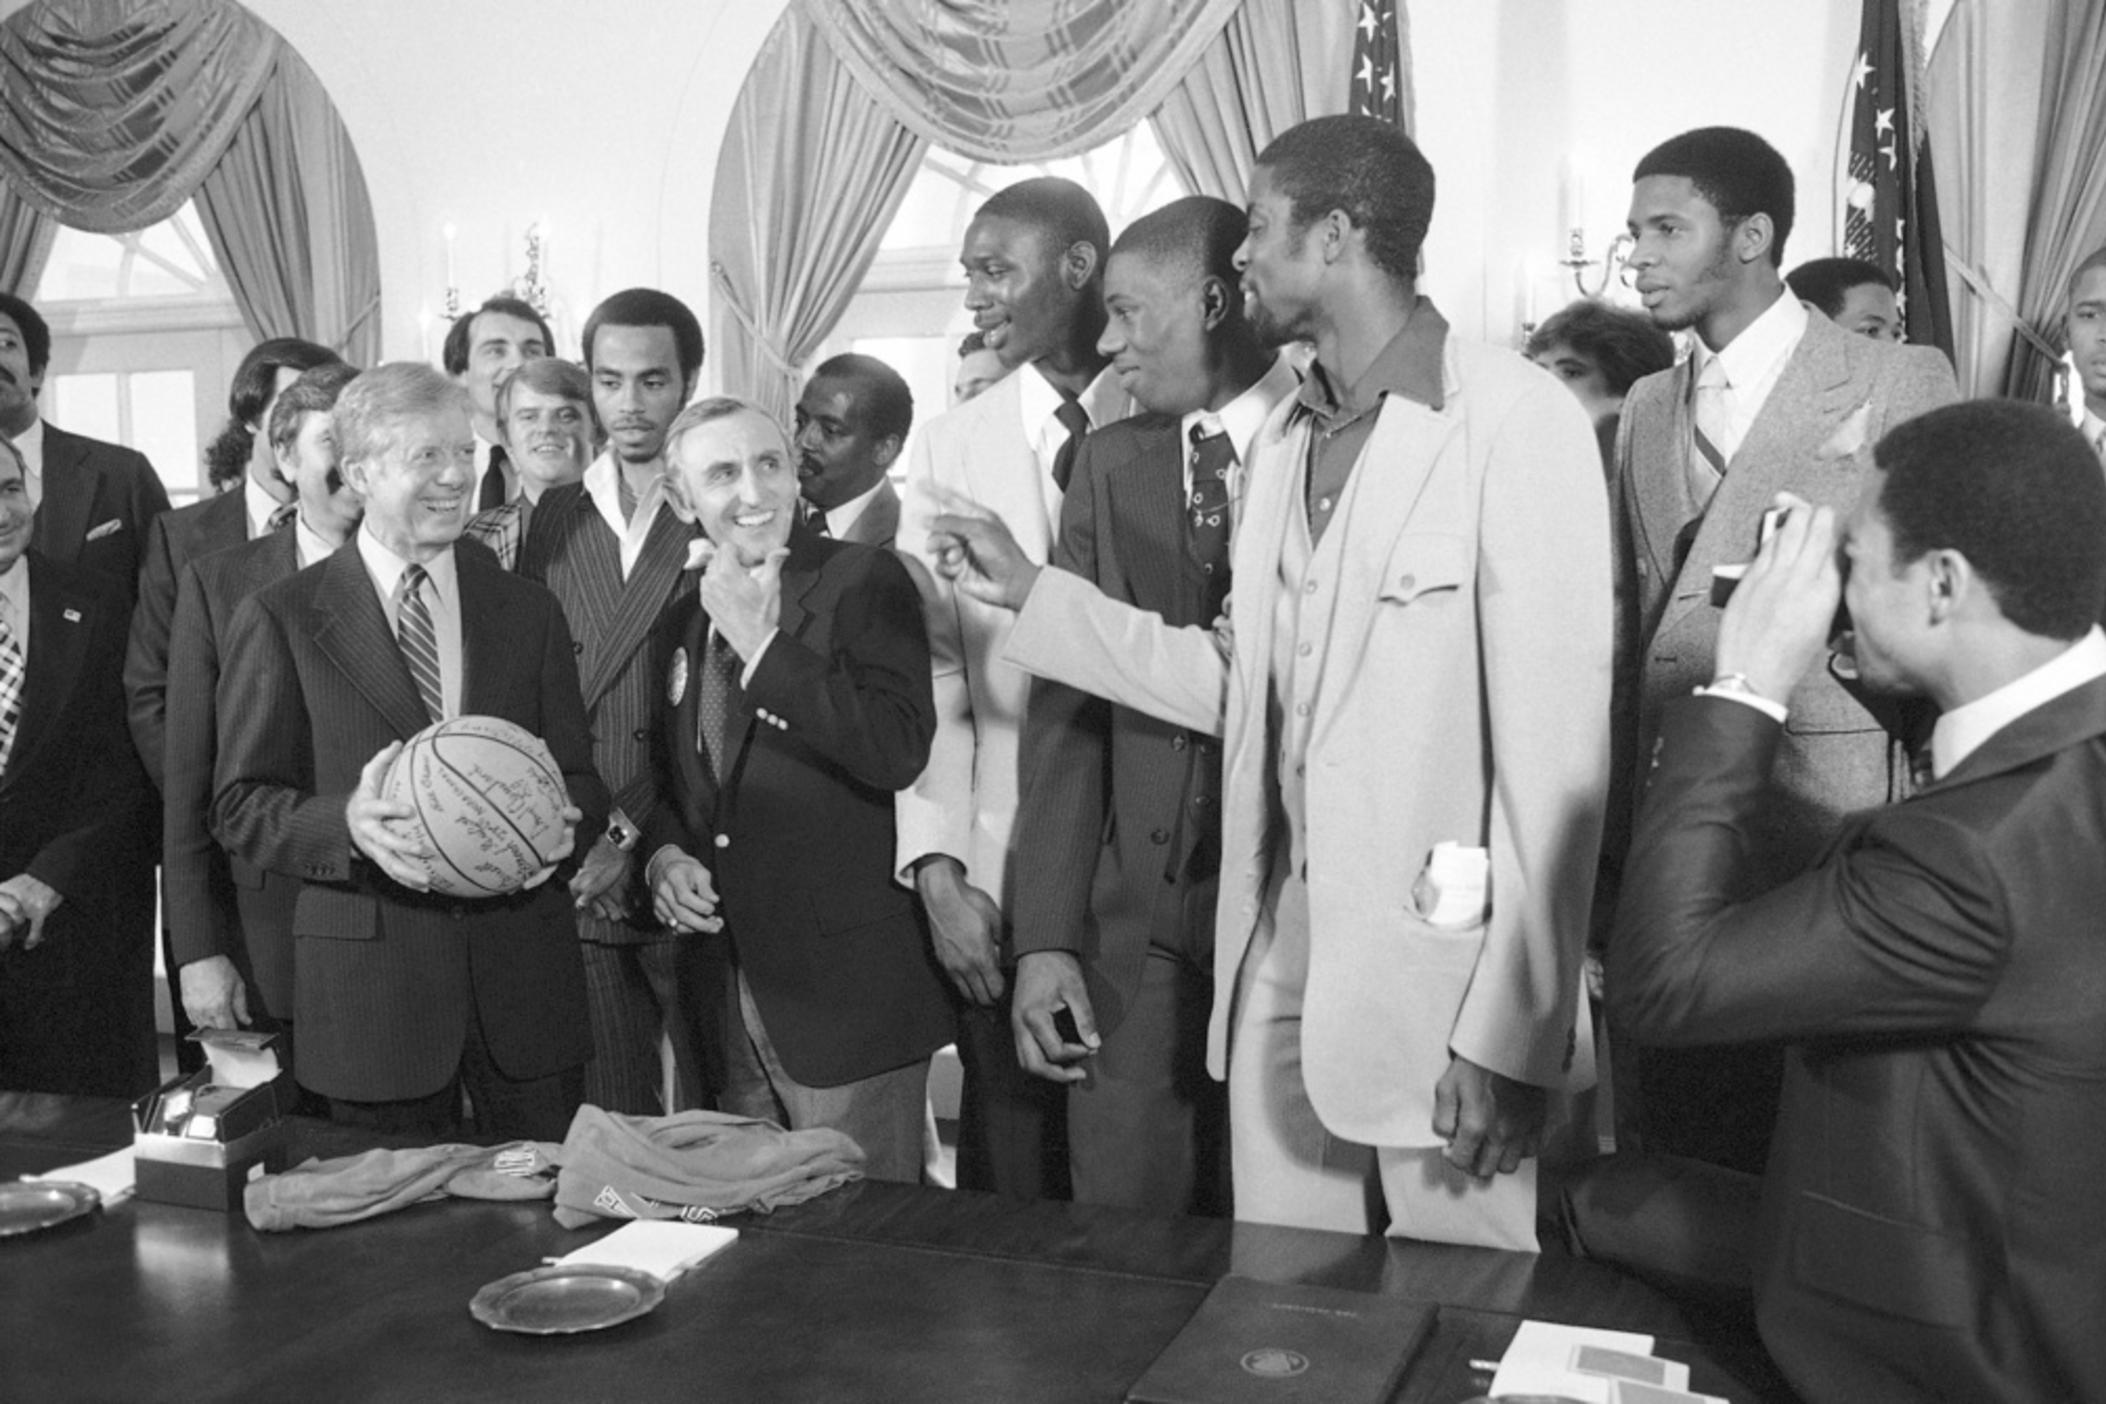 President Jimmy Carter holds a basketball presented to him by members of the University of Louisville basketball team at the White House in Washington on April 3, 1980. From left: President Carter; Darrel Griffith; Rep. Romana Mazzoli, D-Ky.; Derrick Smith; Wylie Brown and Darryl Cleveland. The NCAA Champs paid a visit to the White House after attending luncheon in their honor at Capitol Hill which was hosted by the Kentucky Congressional Delegation.